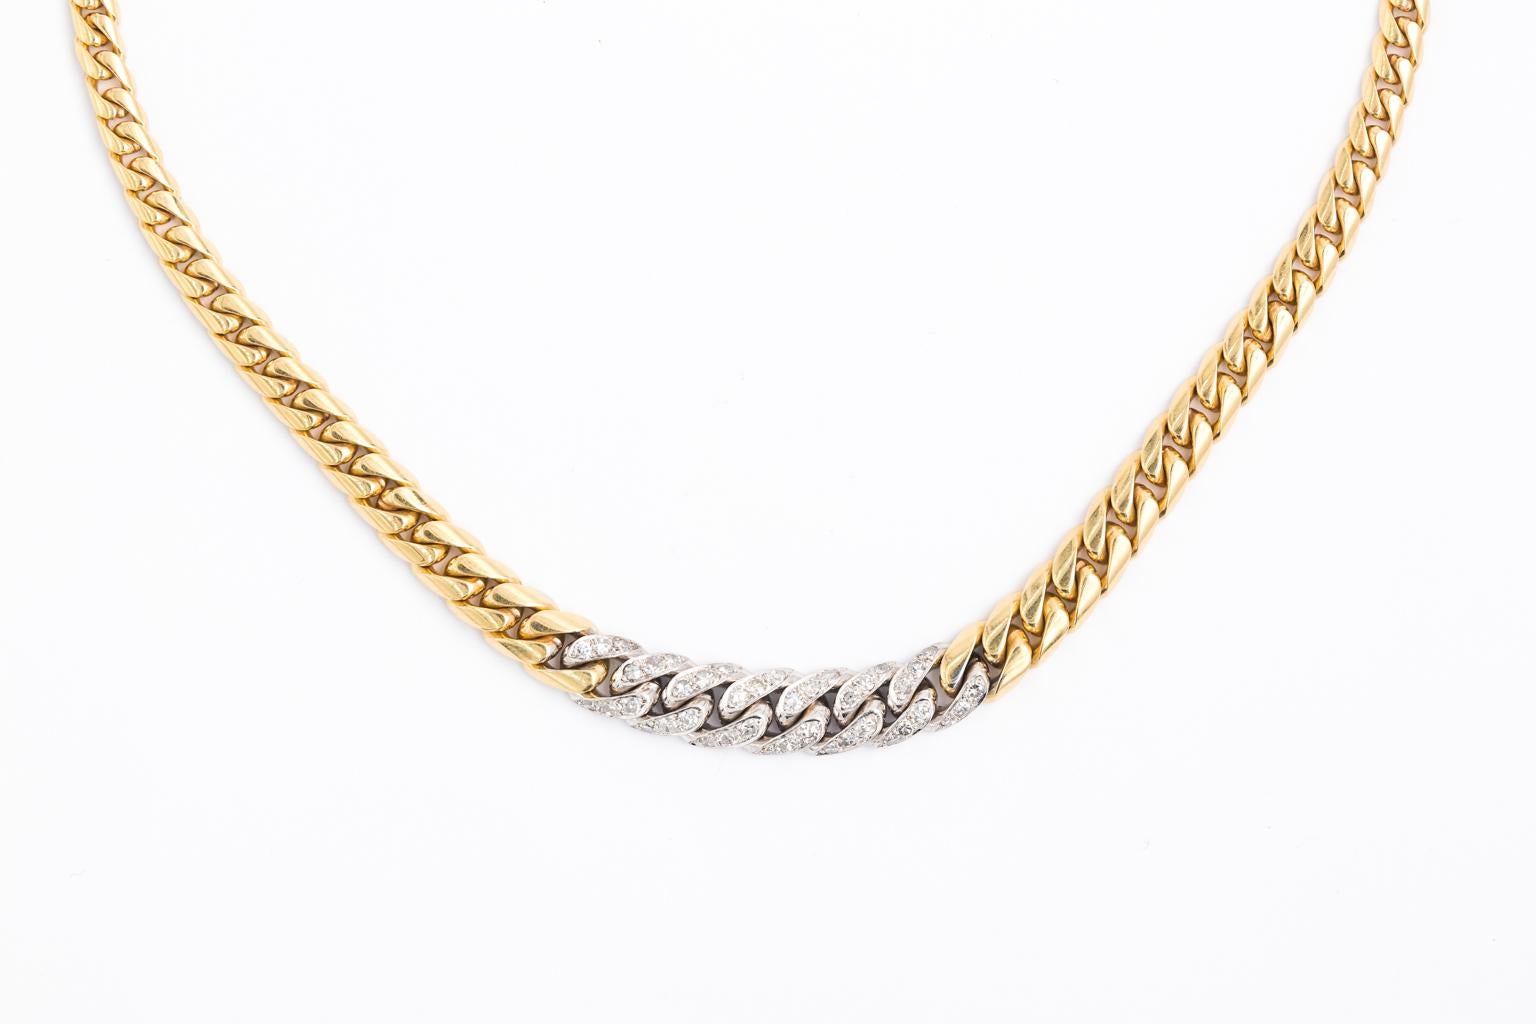 Contemporary 1960s 18 Karat Gold and Diamond Chocker Necklace For Sale